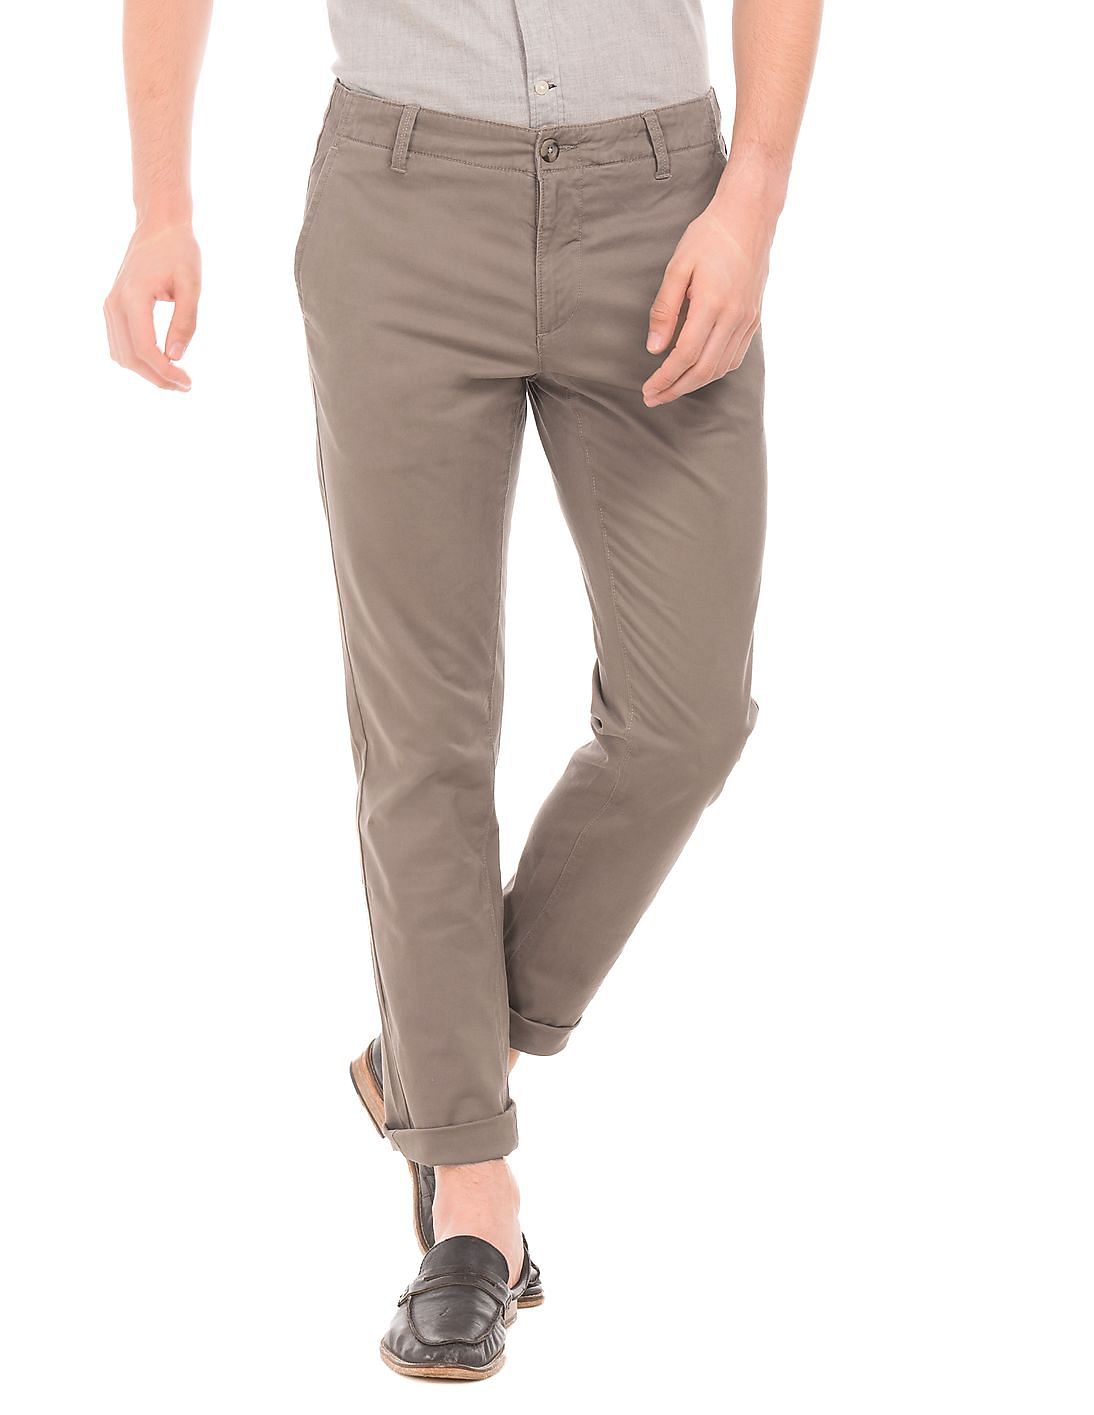 Buy U.S. Polo Assn. Slim Fit Mid Rise Chinos - NNNOW.com